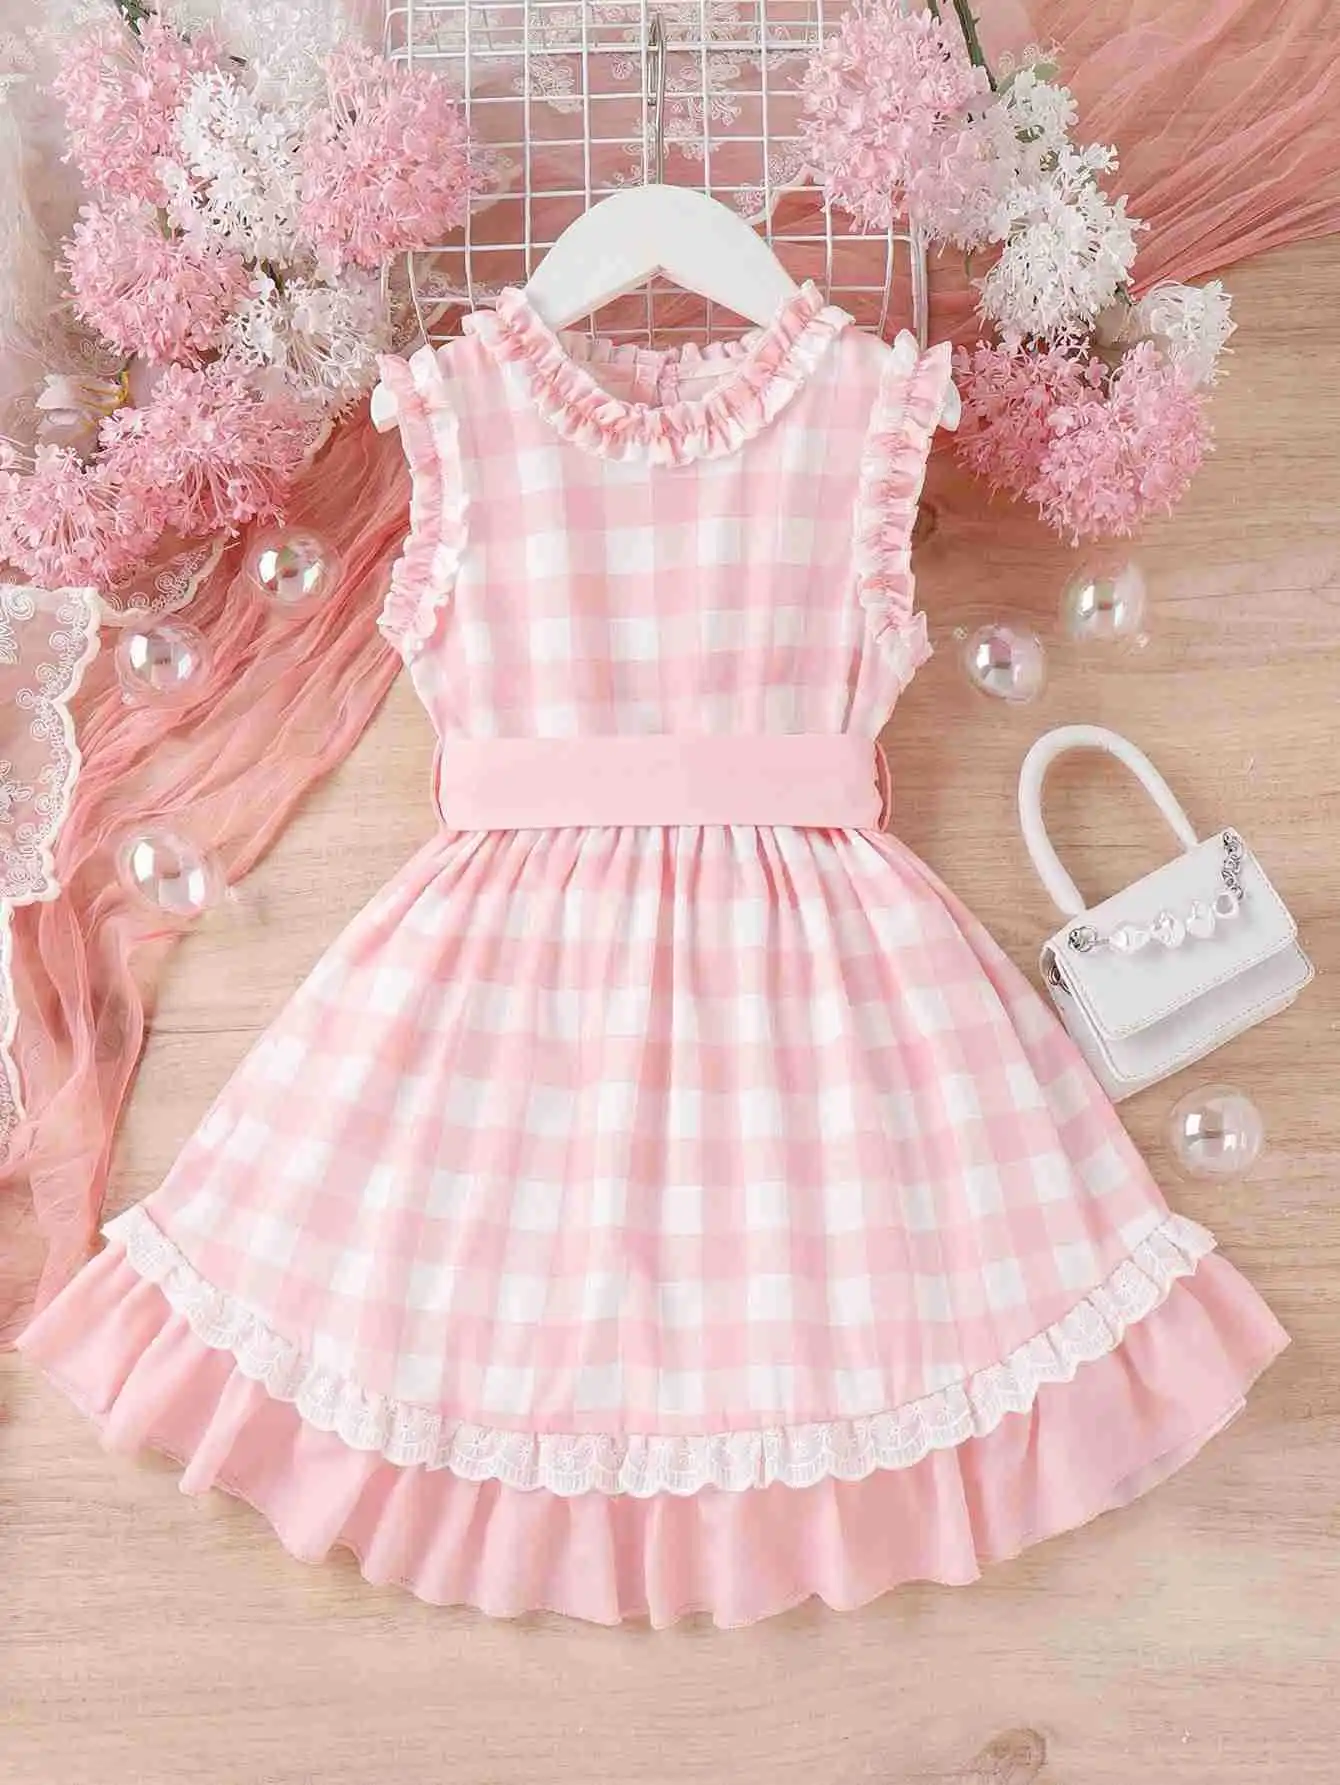 

Girls Princess Dress 2023 Summer Childrens Wear Girl Baby Lace Lace Plaid Sleeveless Strapping Rural Ruffled Dress Casual Dress